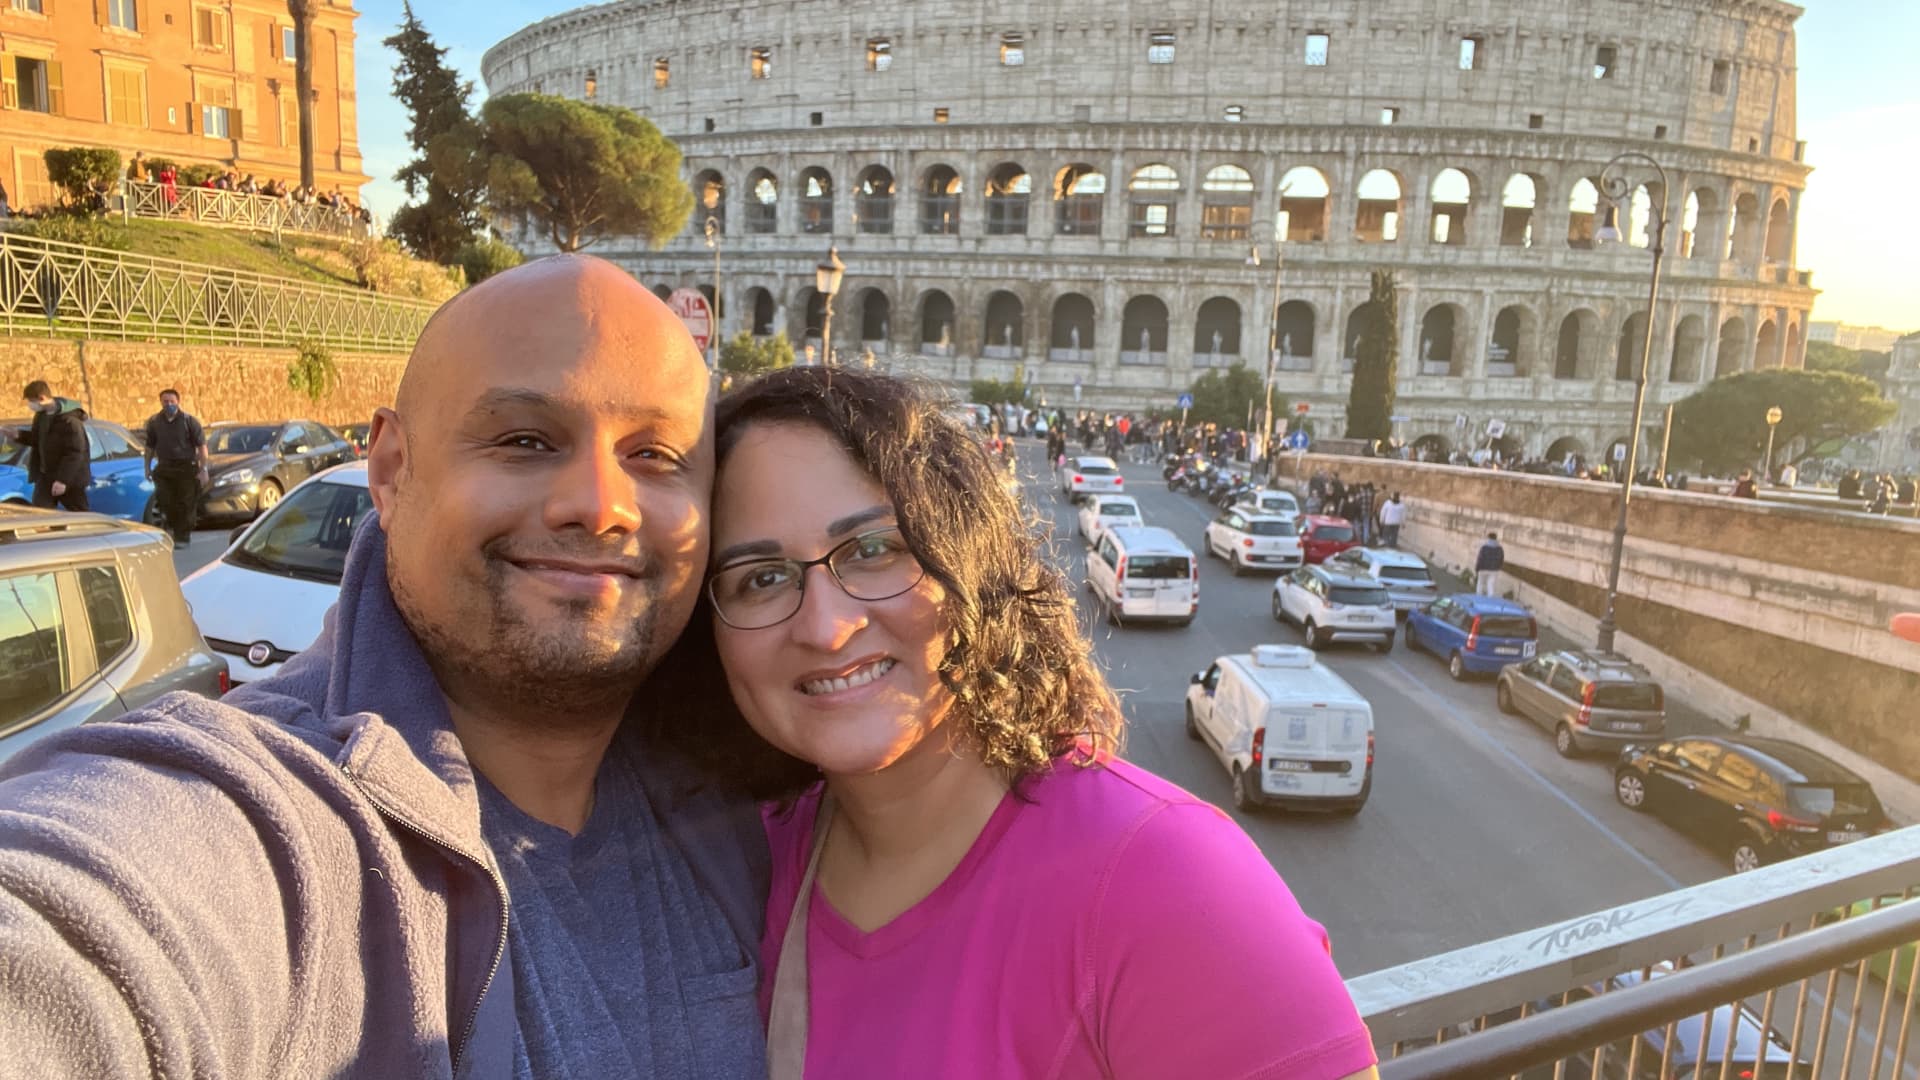 Rome has been the couple's favorite stop so far.